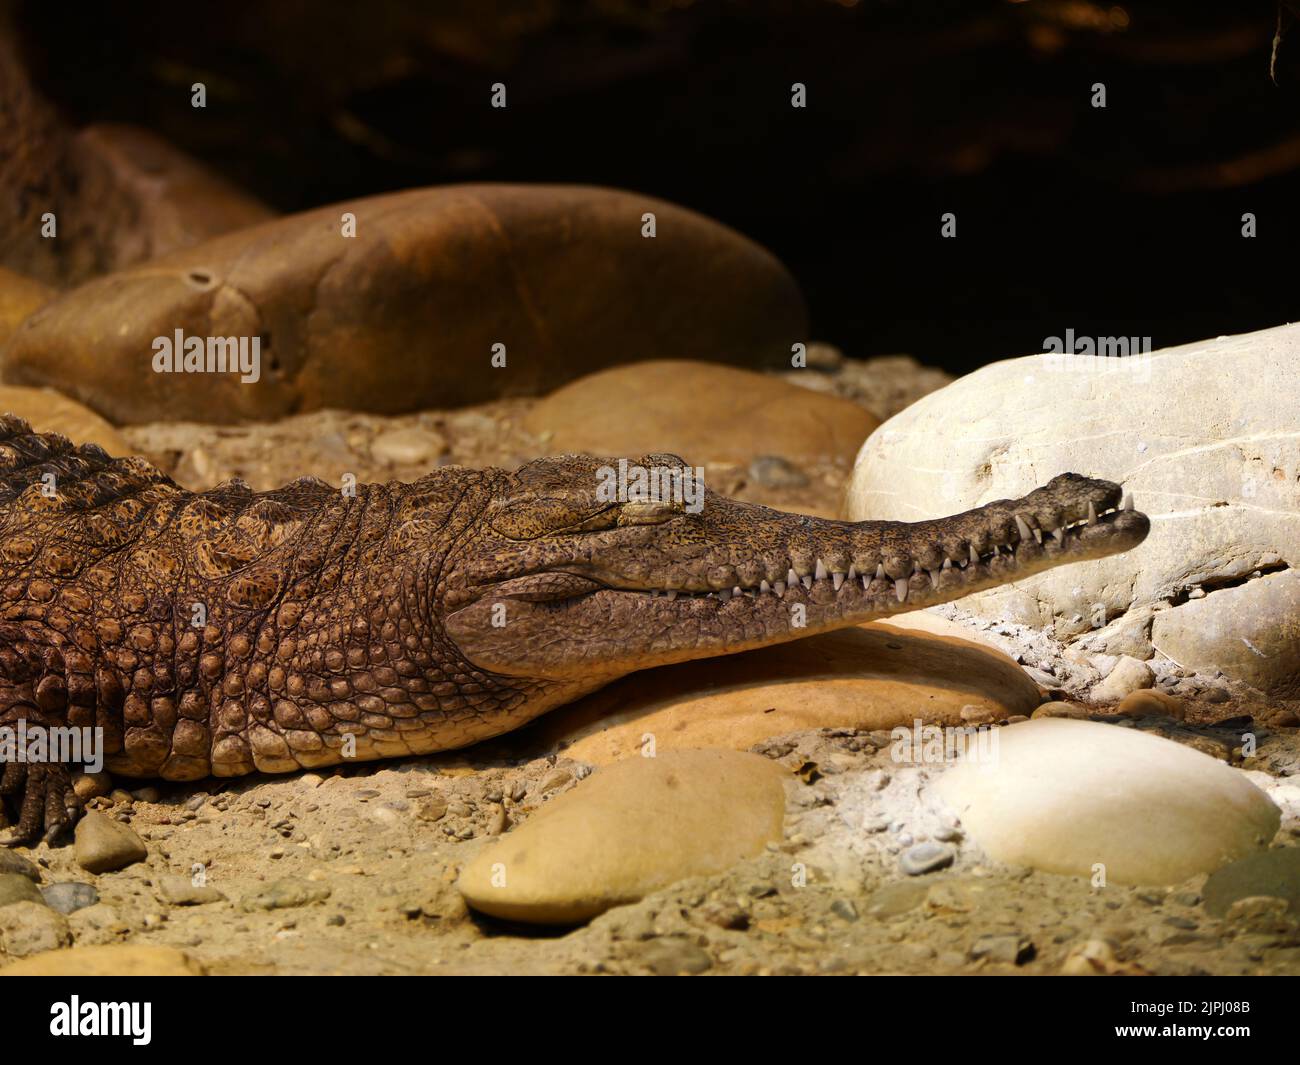 A closeup side shot of a brown crocodile with a long snout on the stones Stock Photo